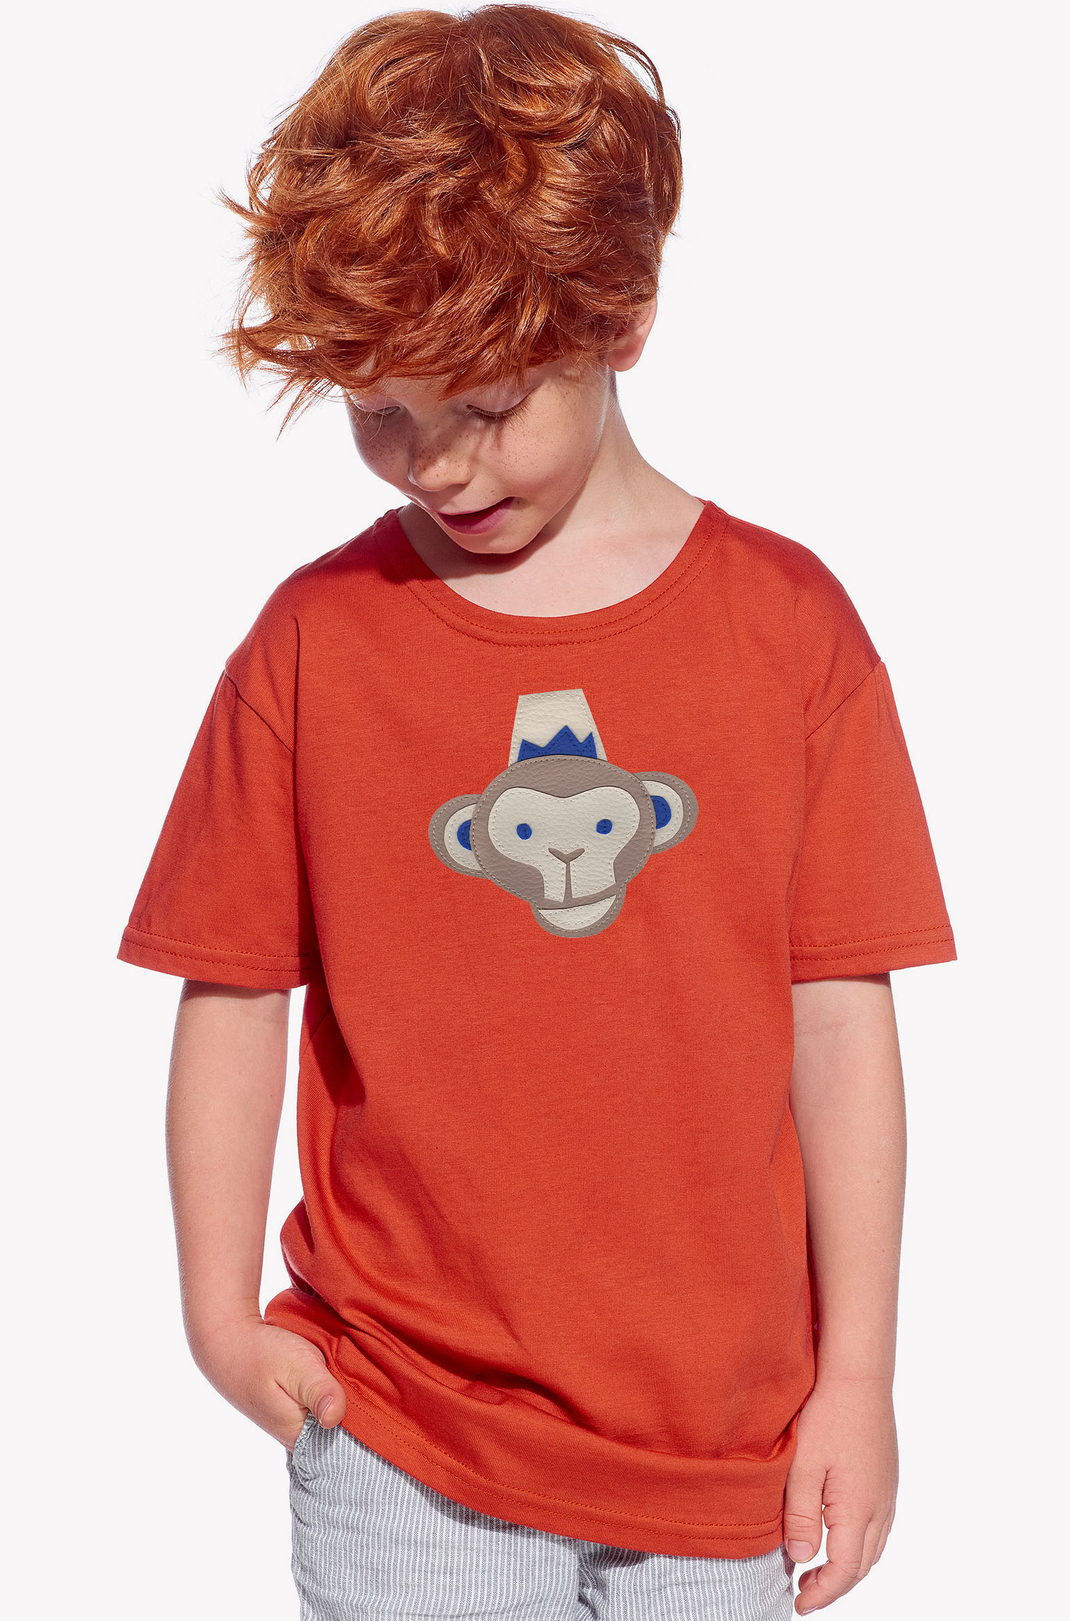 Shirt with a monkey